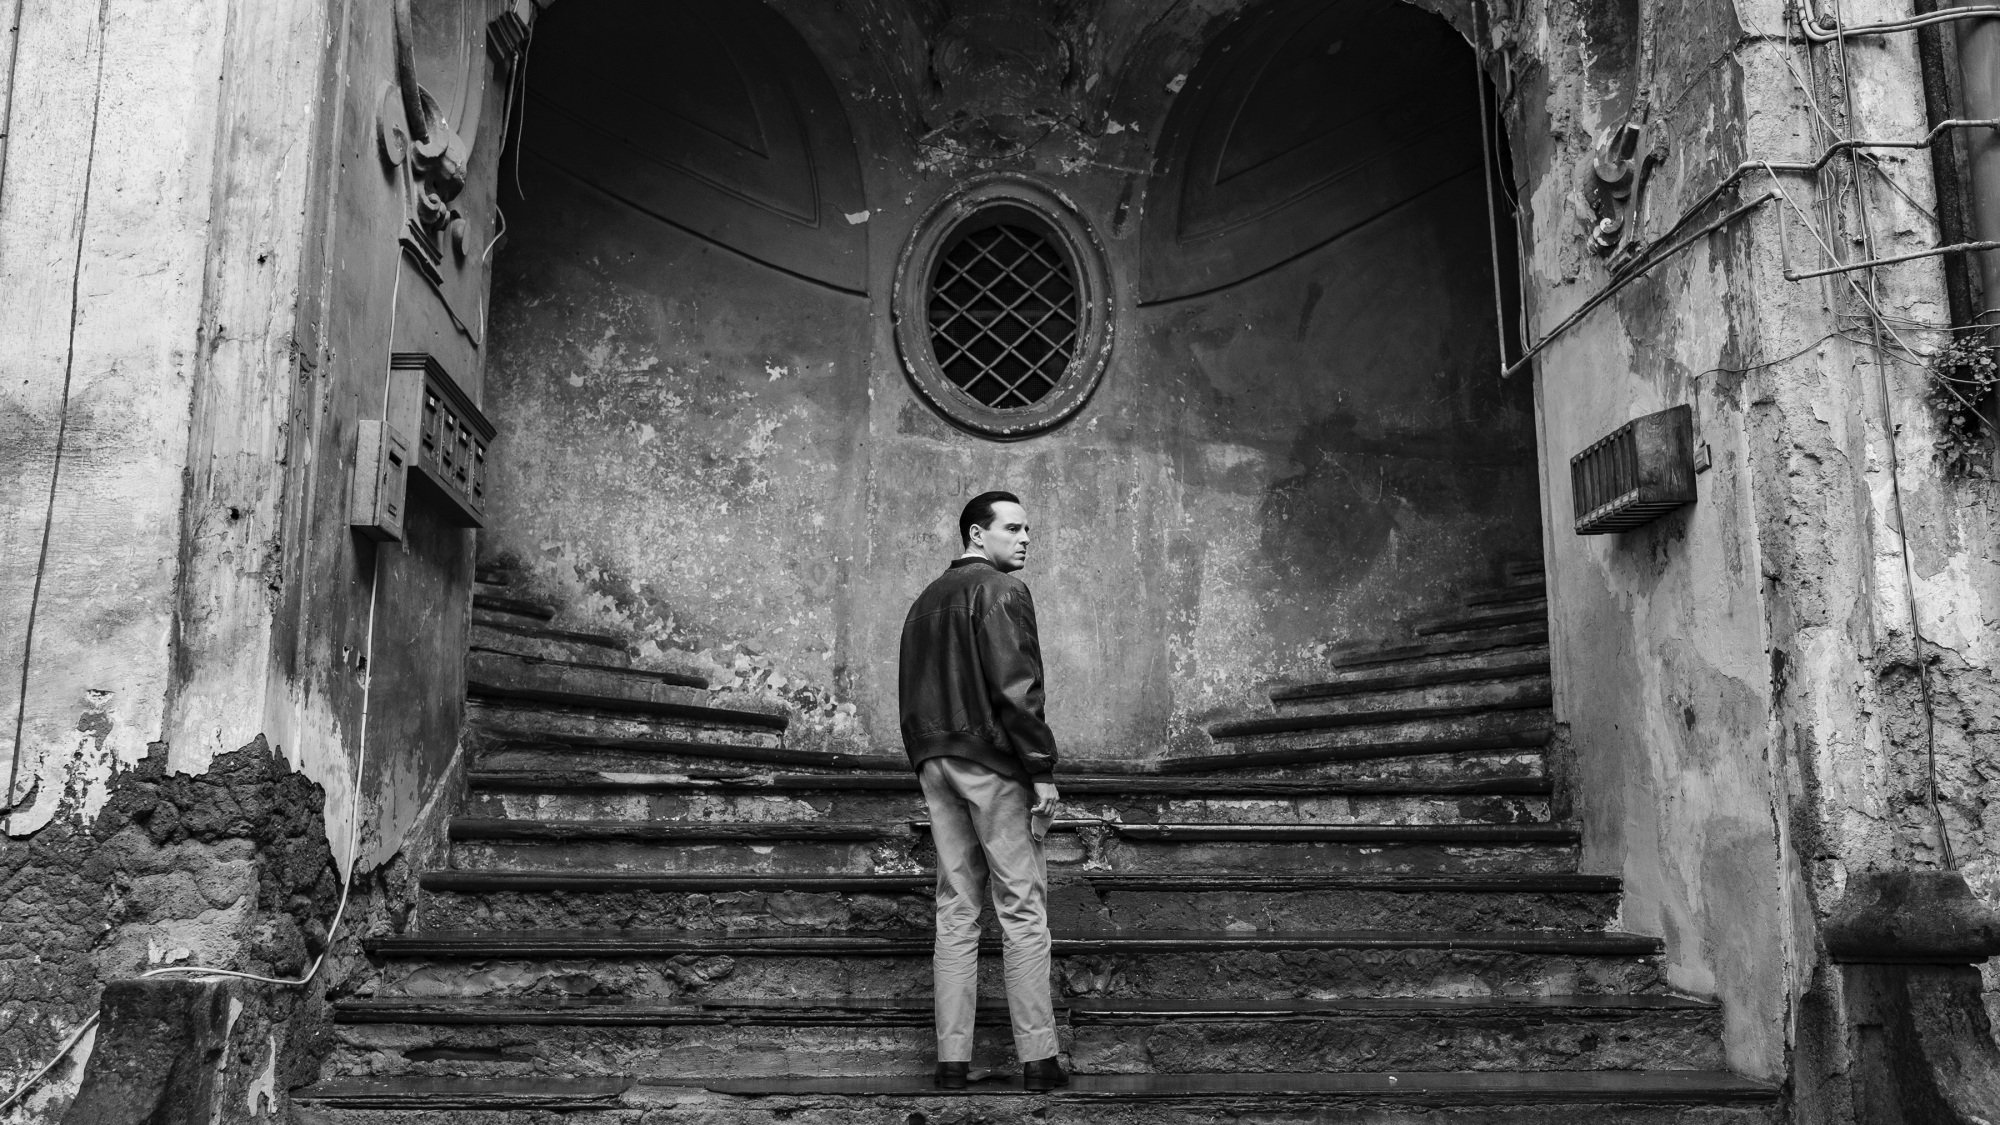 A man stands on a staircase to two different paths leading up.